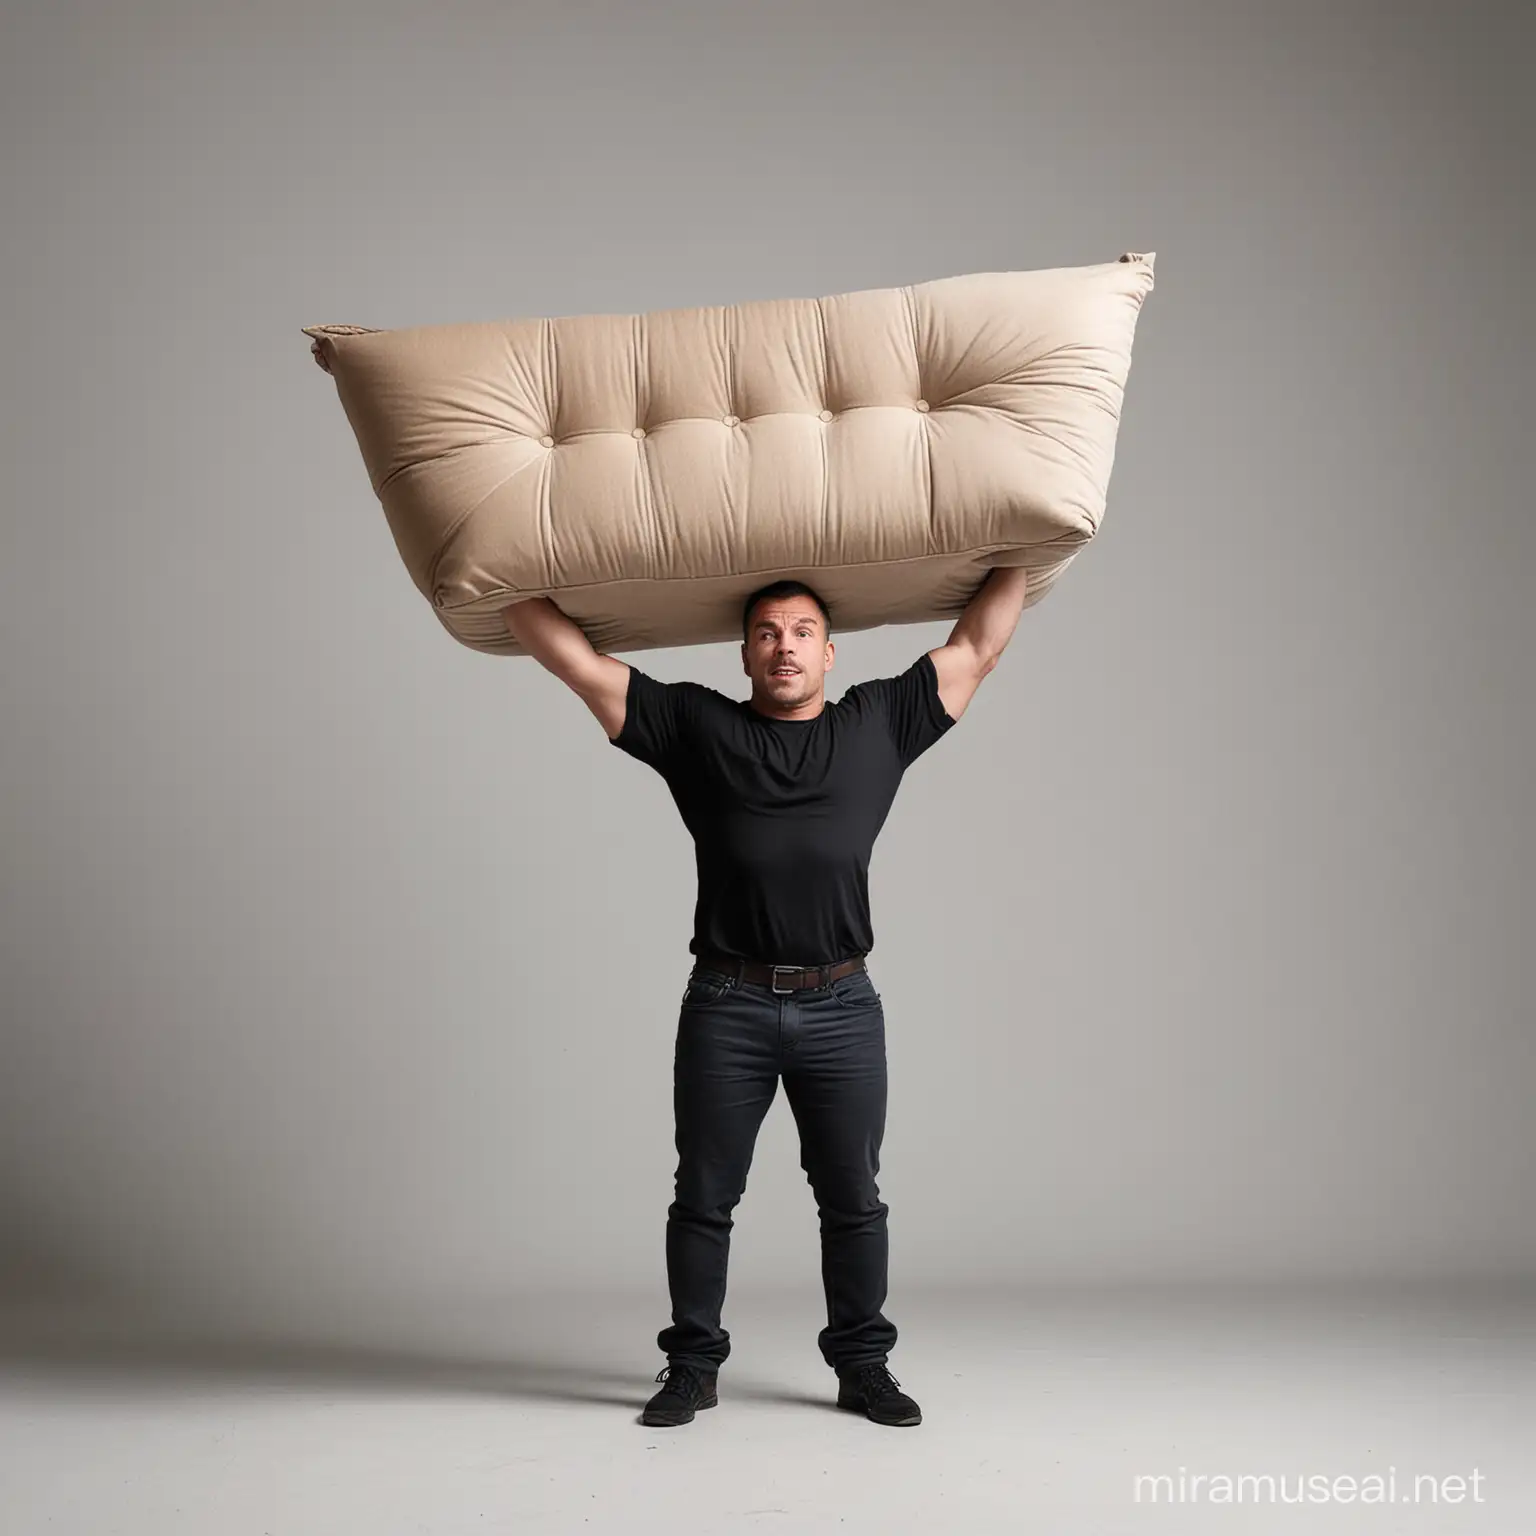 Muscular Man Carrying Sofa on Shoulder Strength and Mobility Displayed